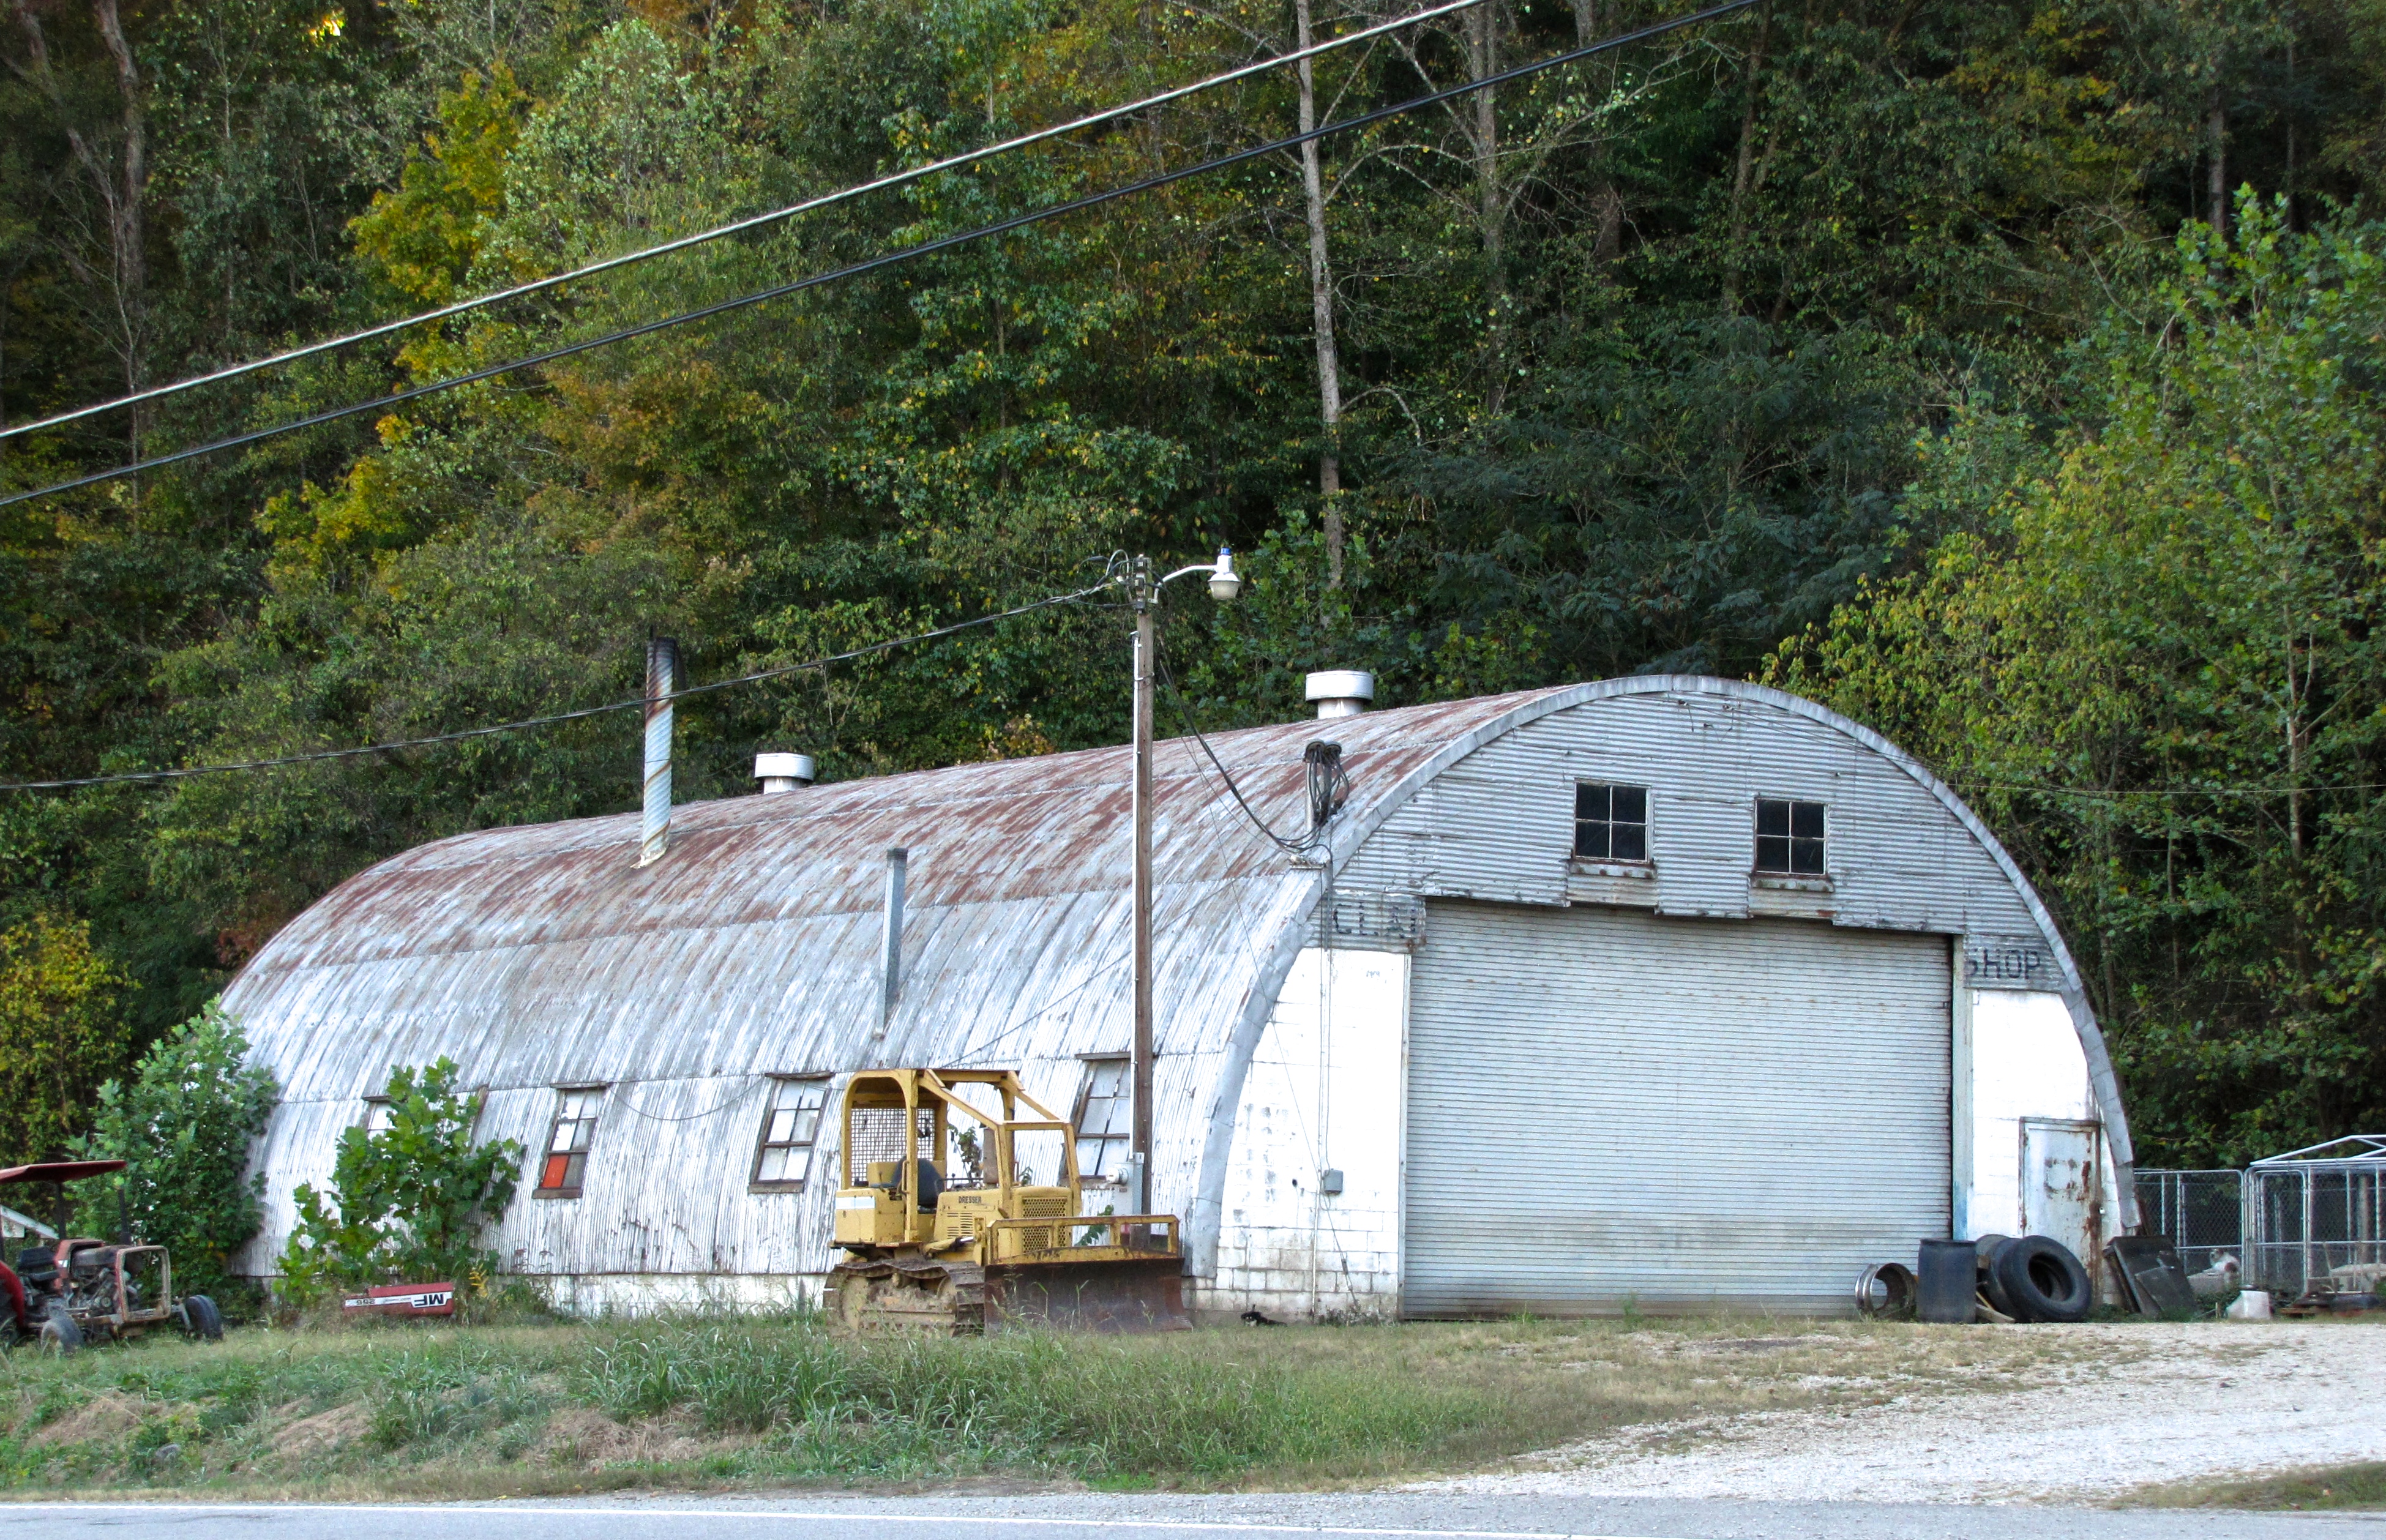 quonset hut in Fords, NJ